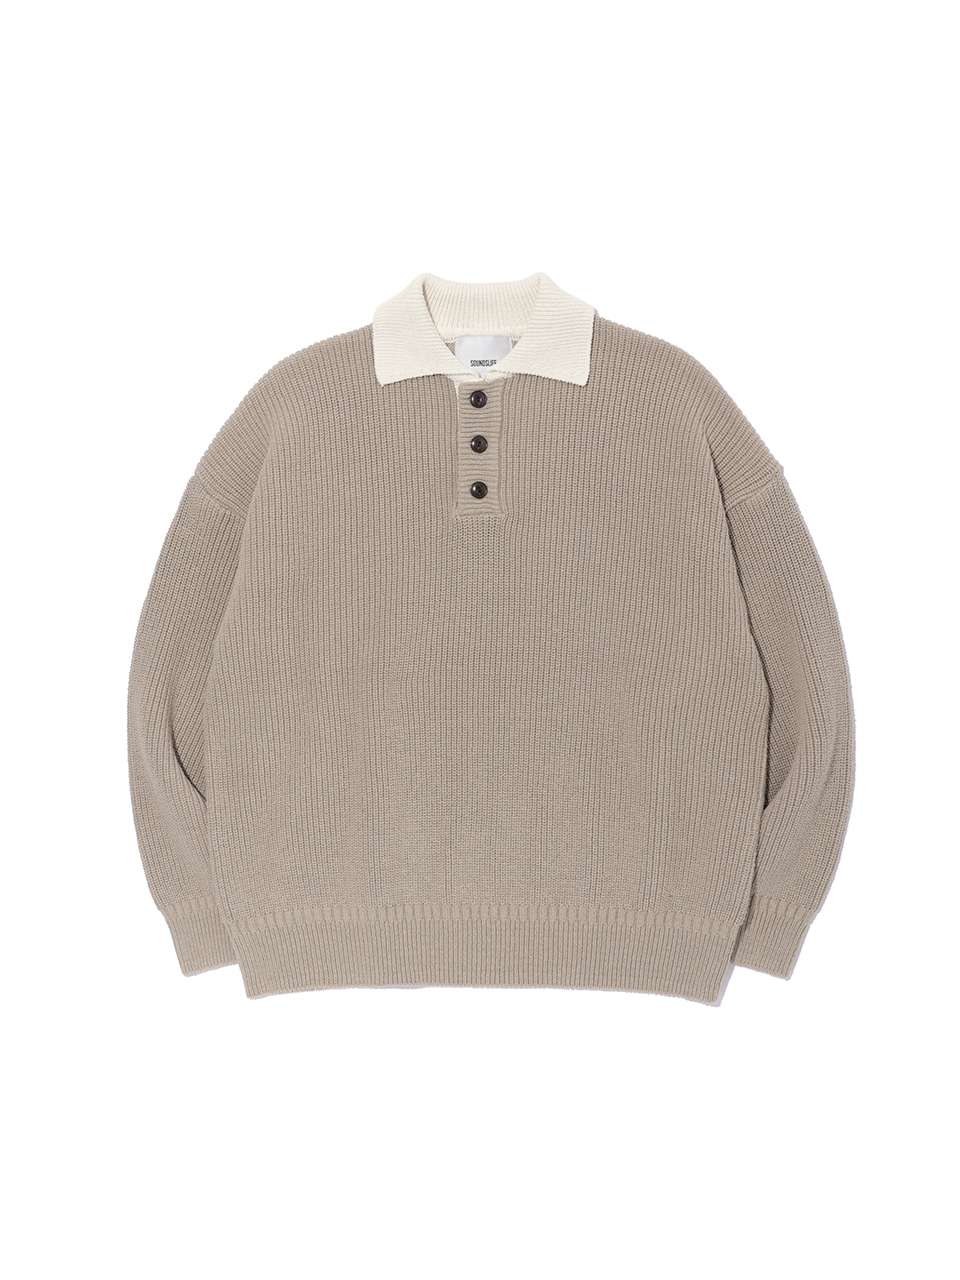 SOUNDSLIFE - Heavy Cotton Rugby Knit Beige